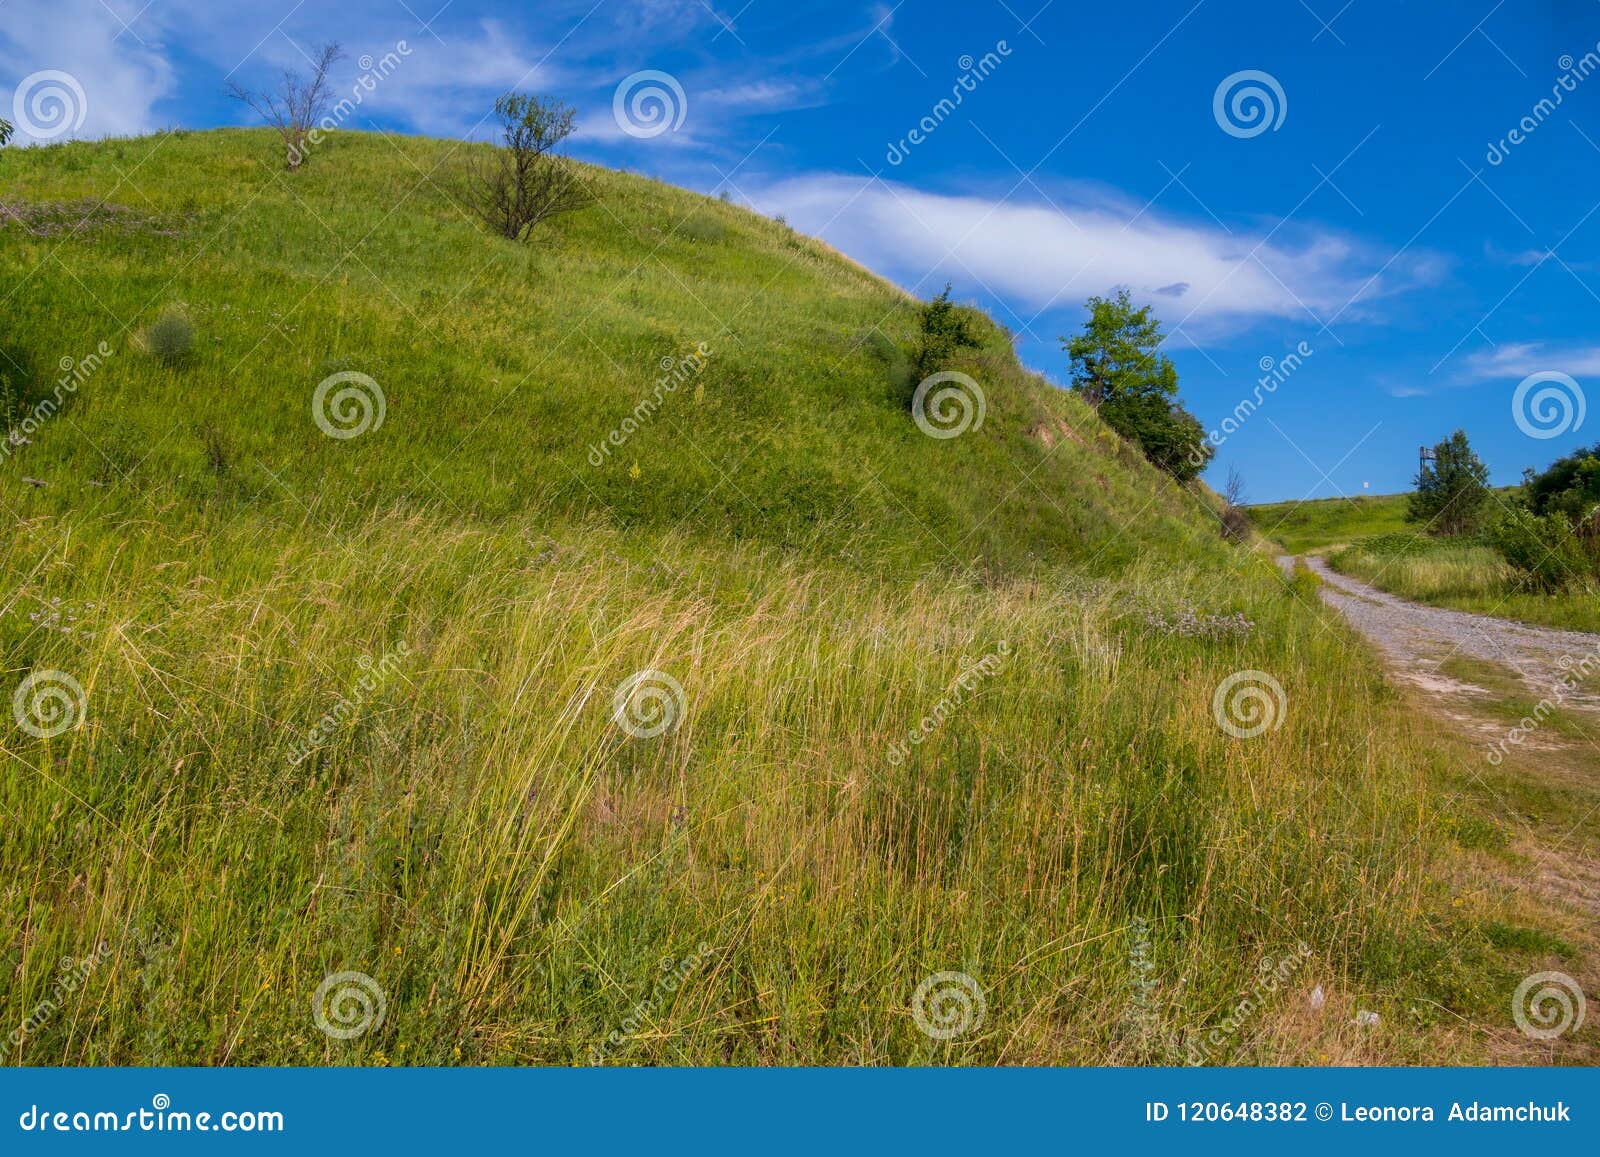 A Small Picturesque Hillock Covered with Green Grass and Rare